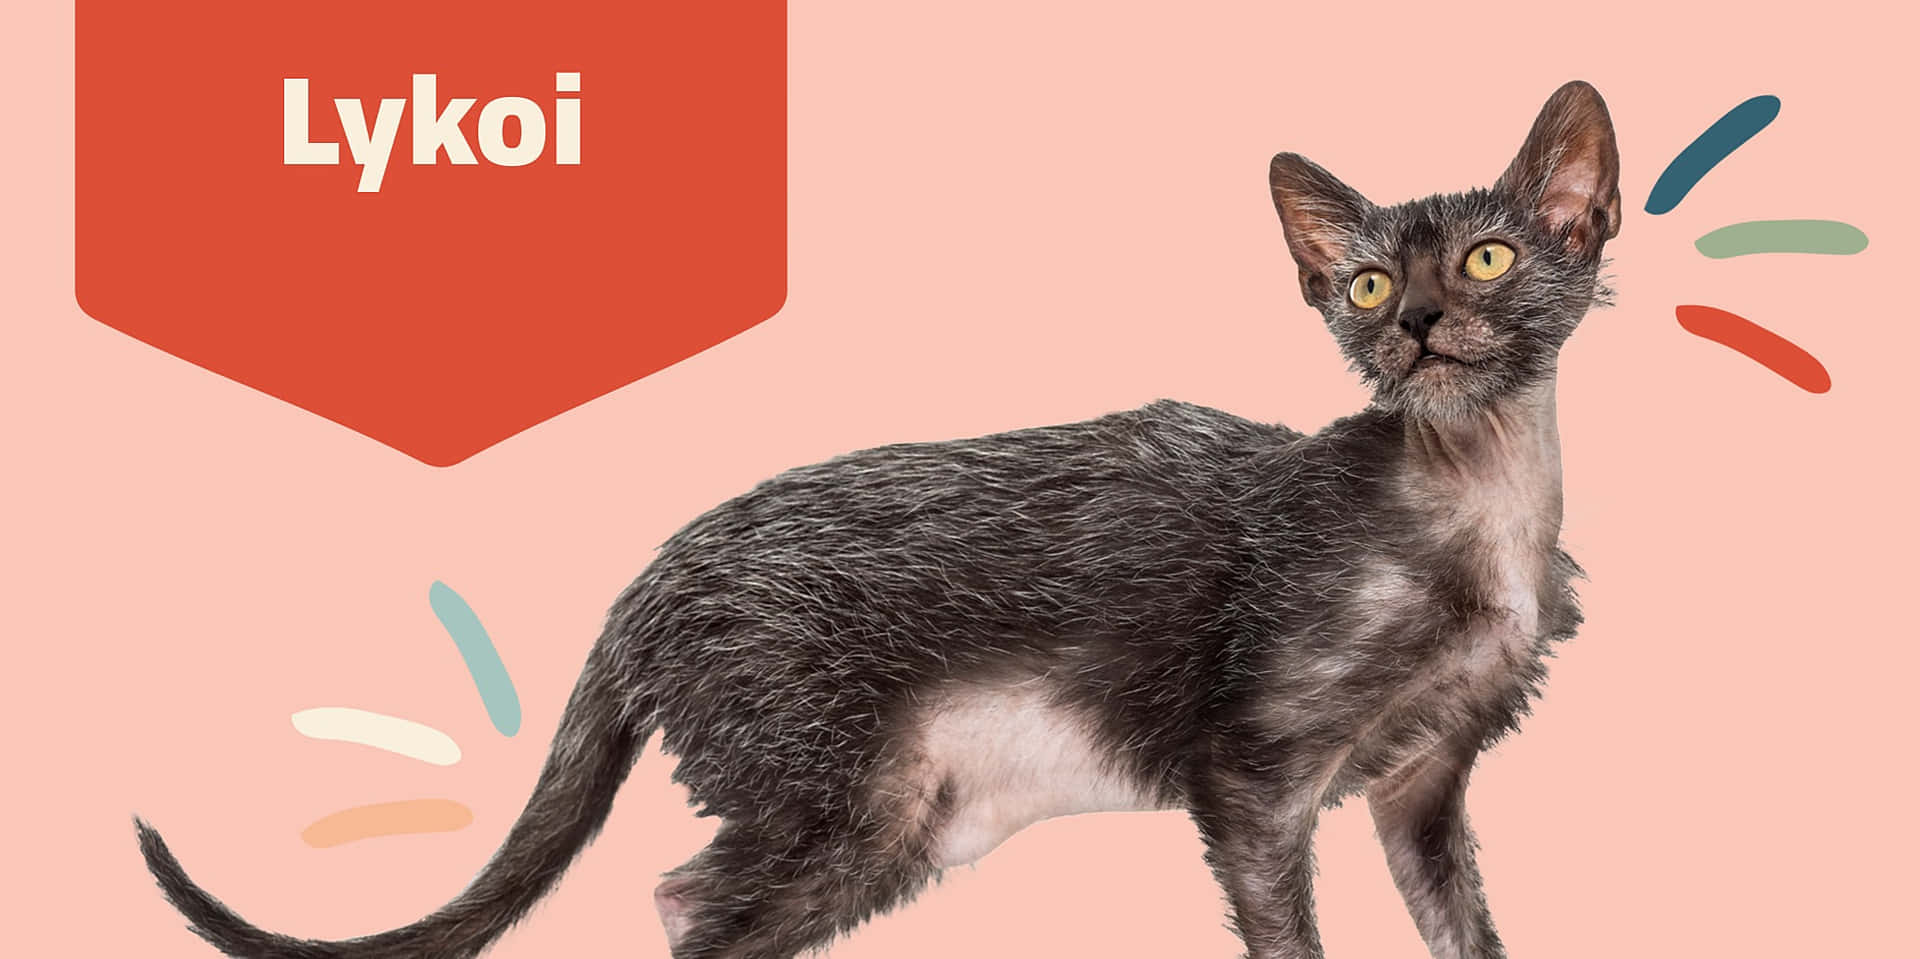 Adorable Lykoi cat lounging on a soft bed Wallpaper